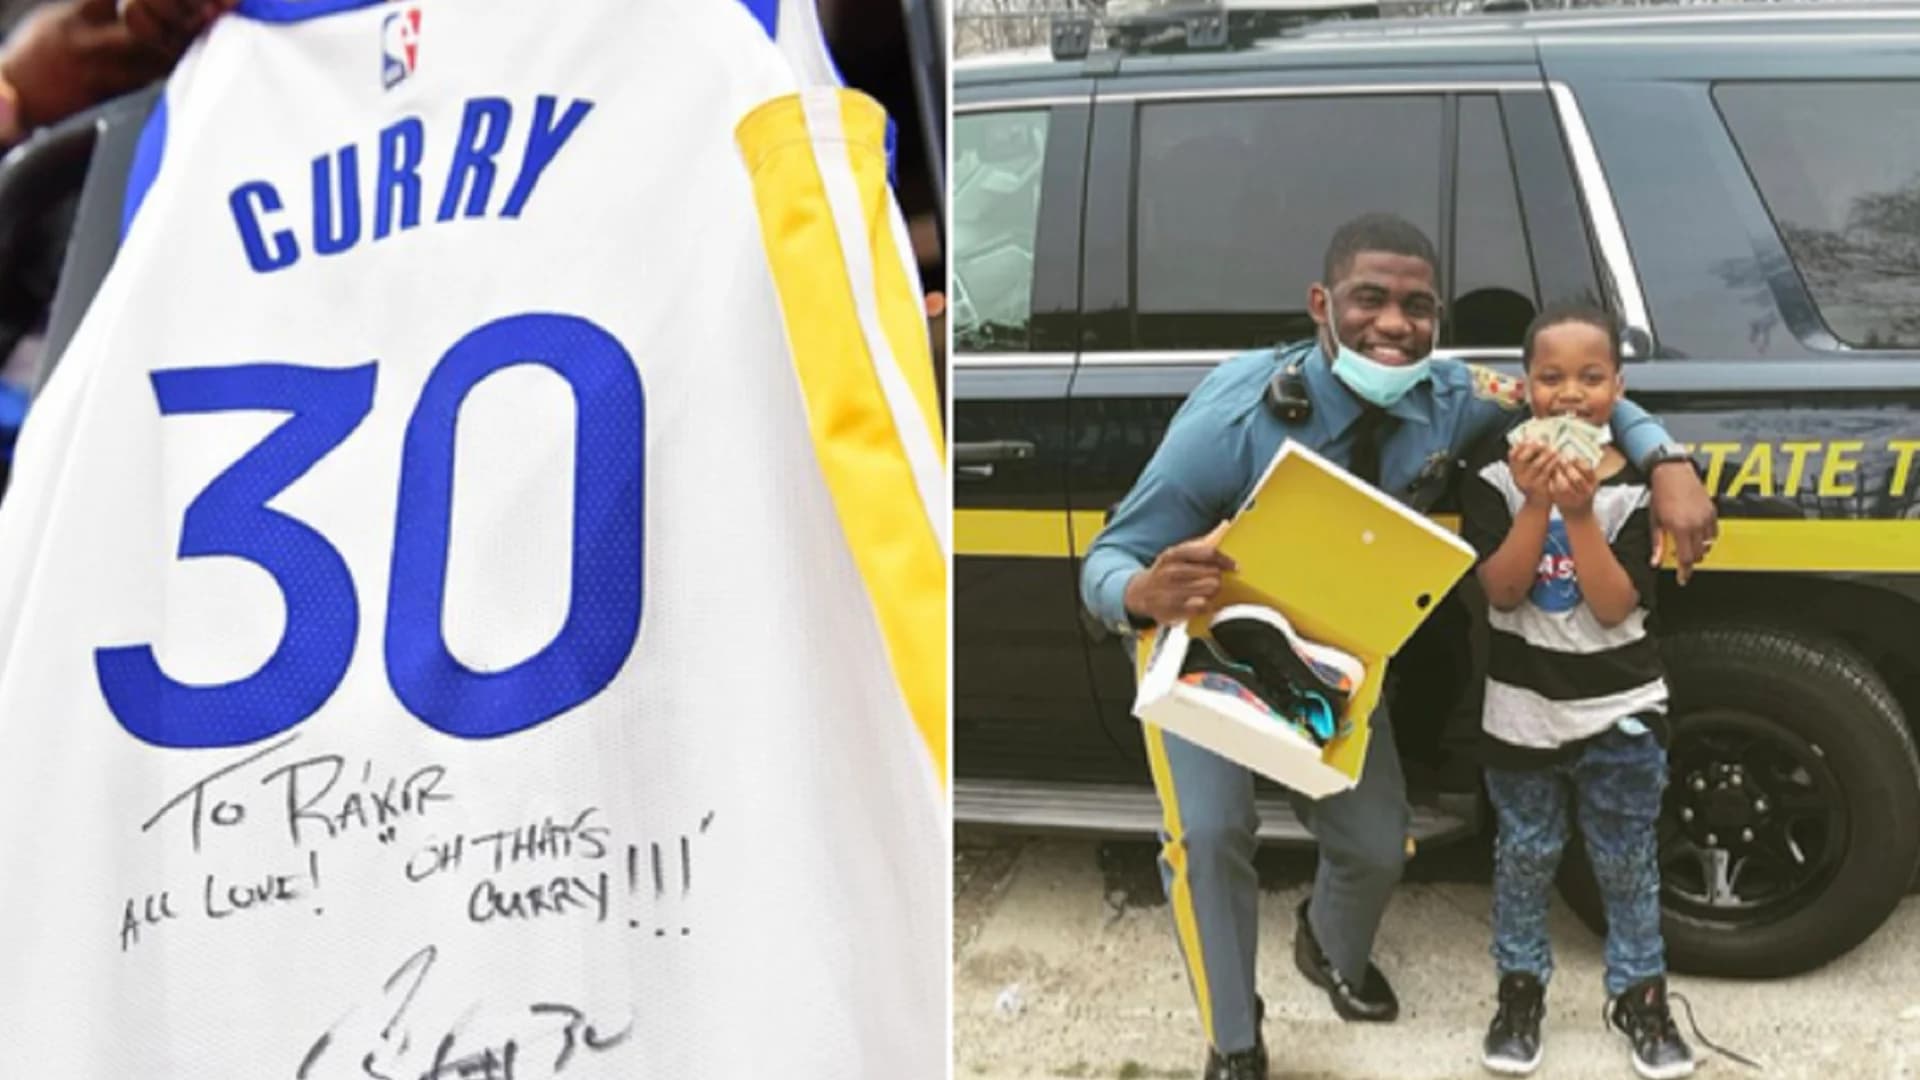 Steph Curry gives jersey to Delaware state trooper seen in viral video; drains 10 threes in win